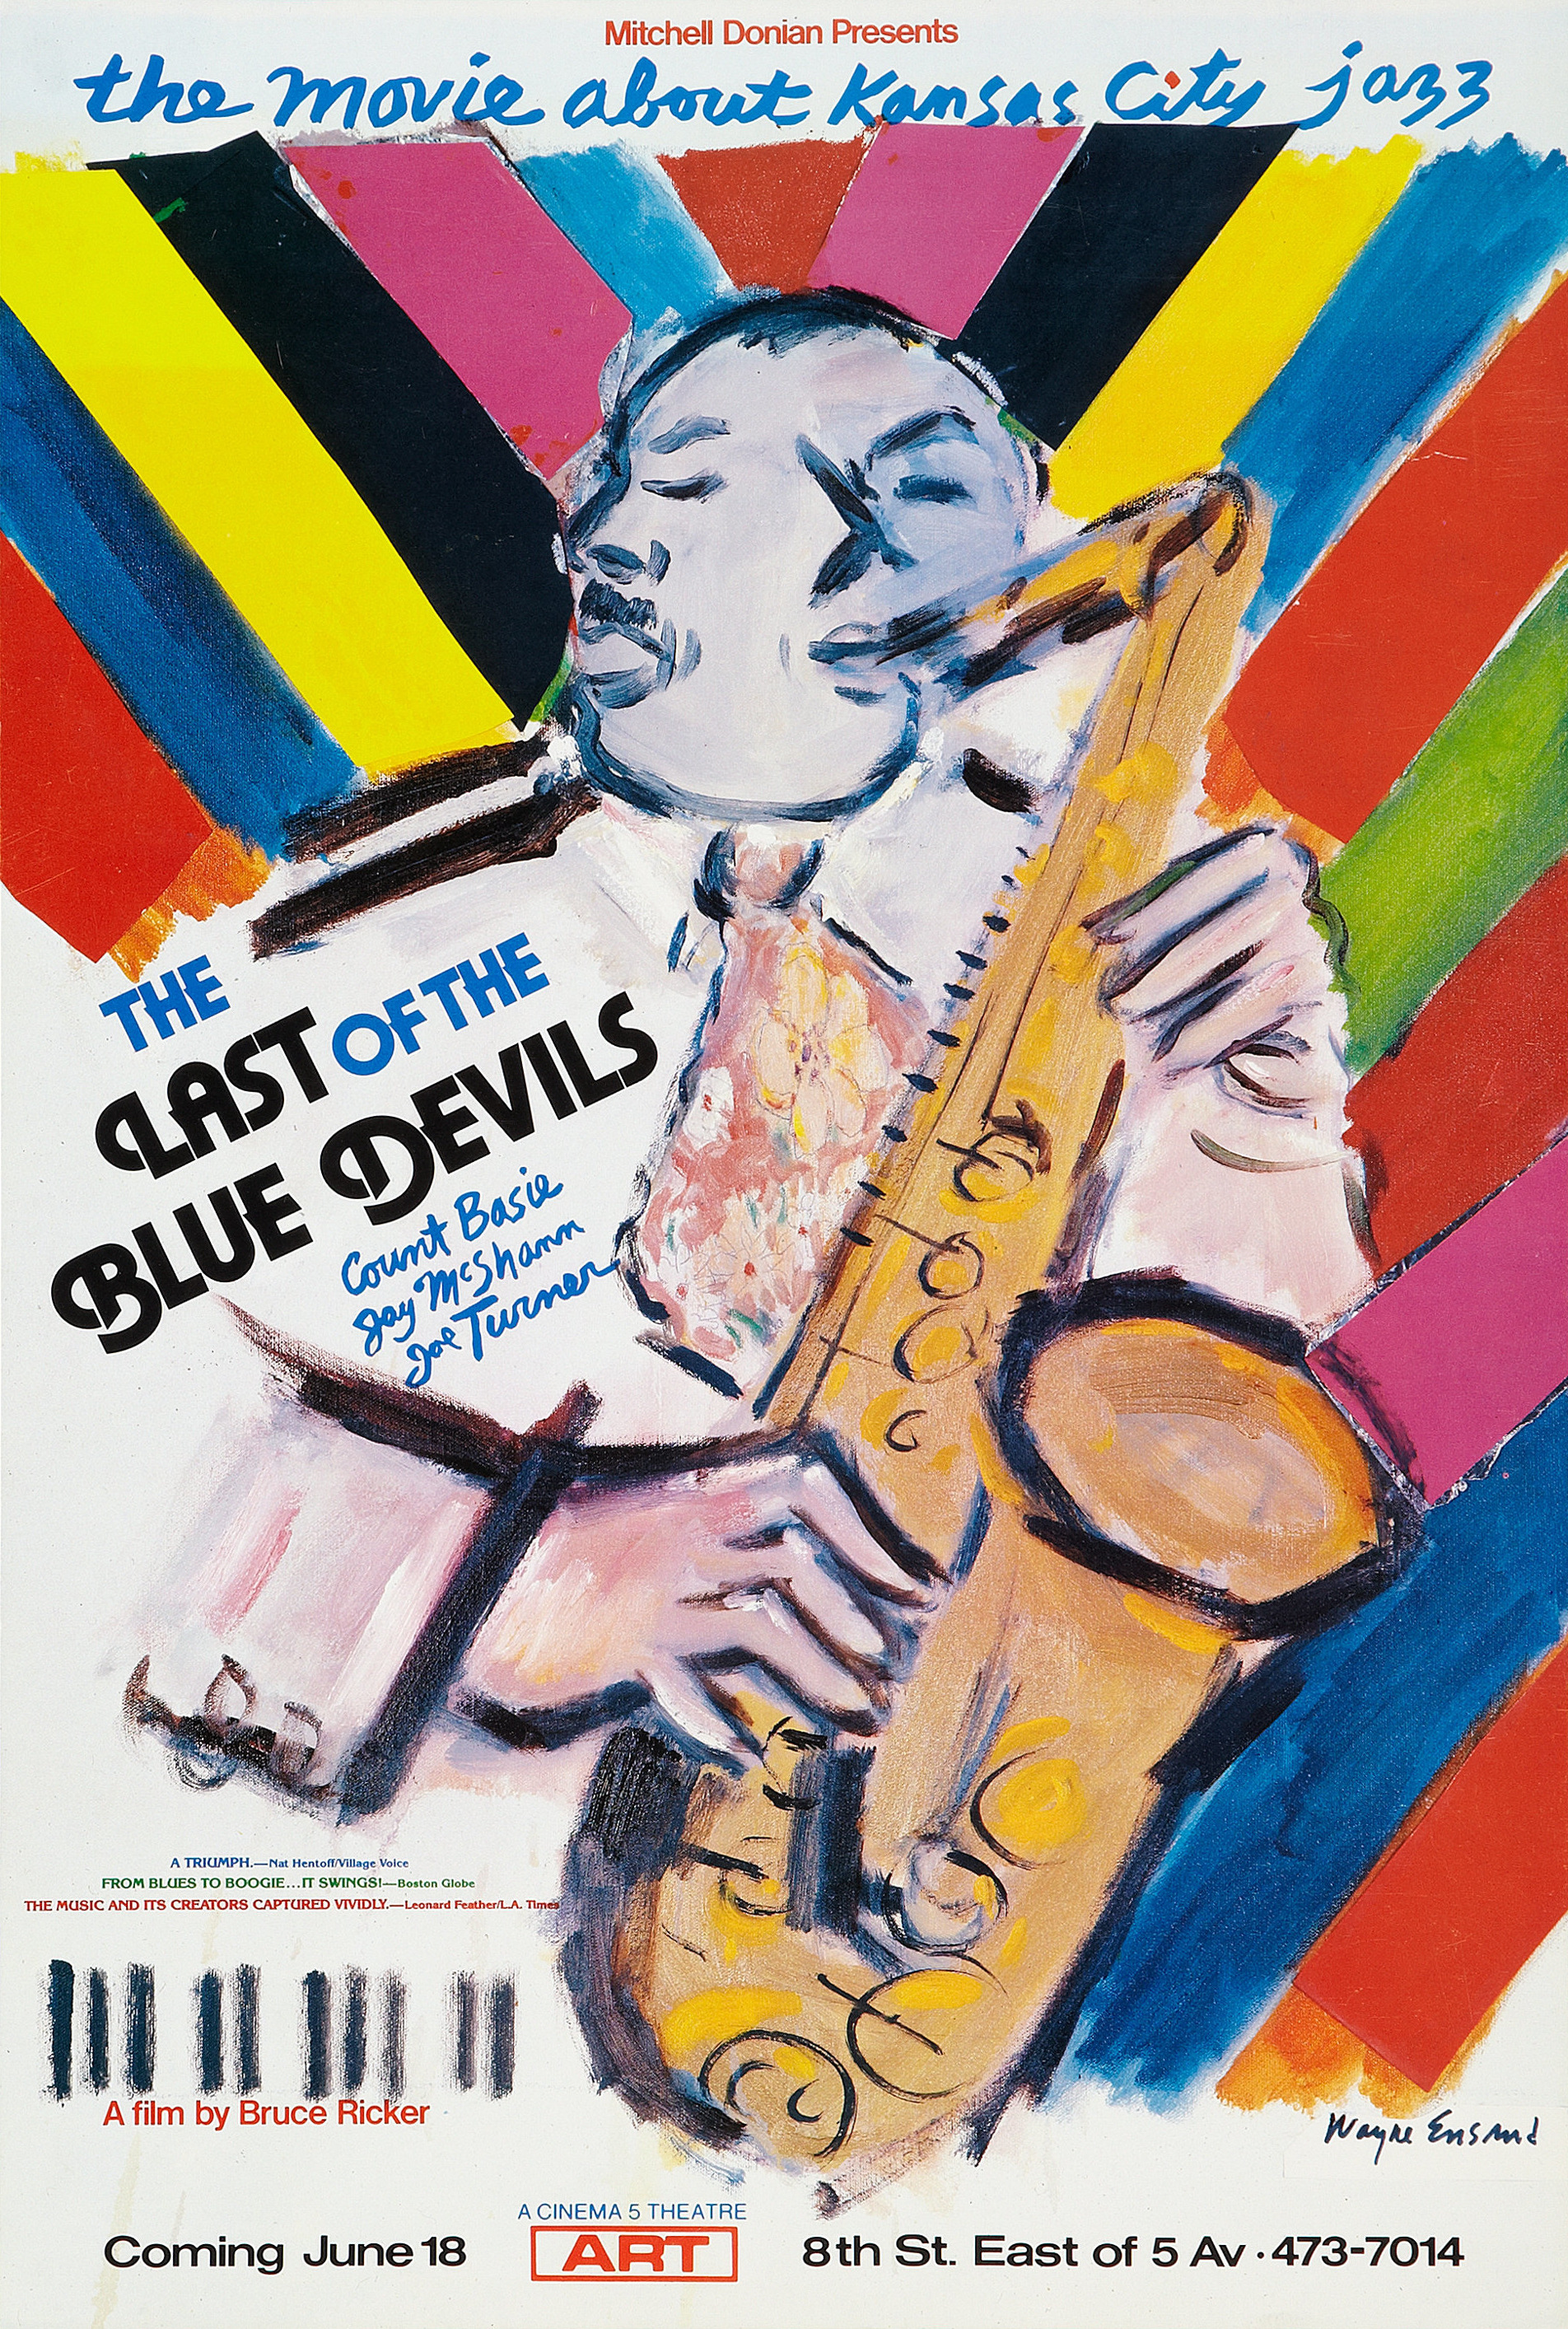 Mega Sized Movie Poster Image for The Last of the Blue Devils 